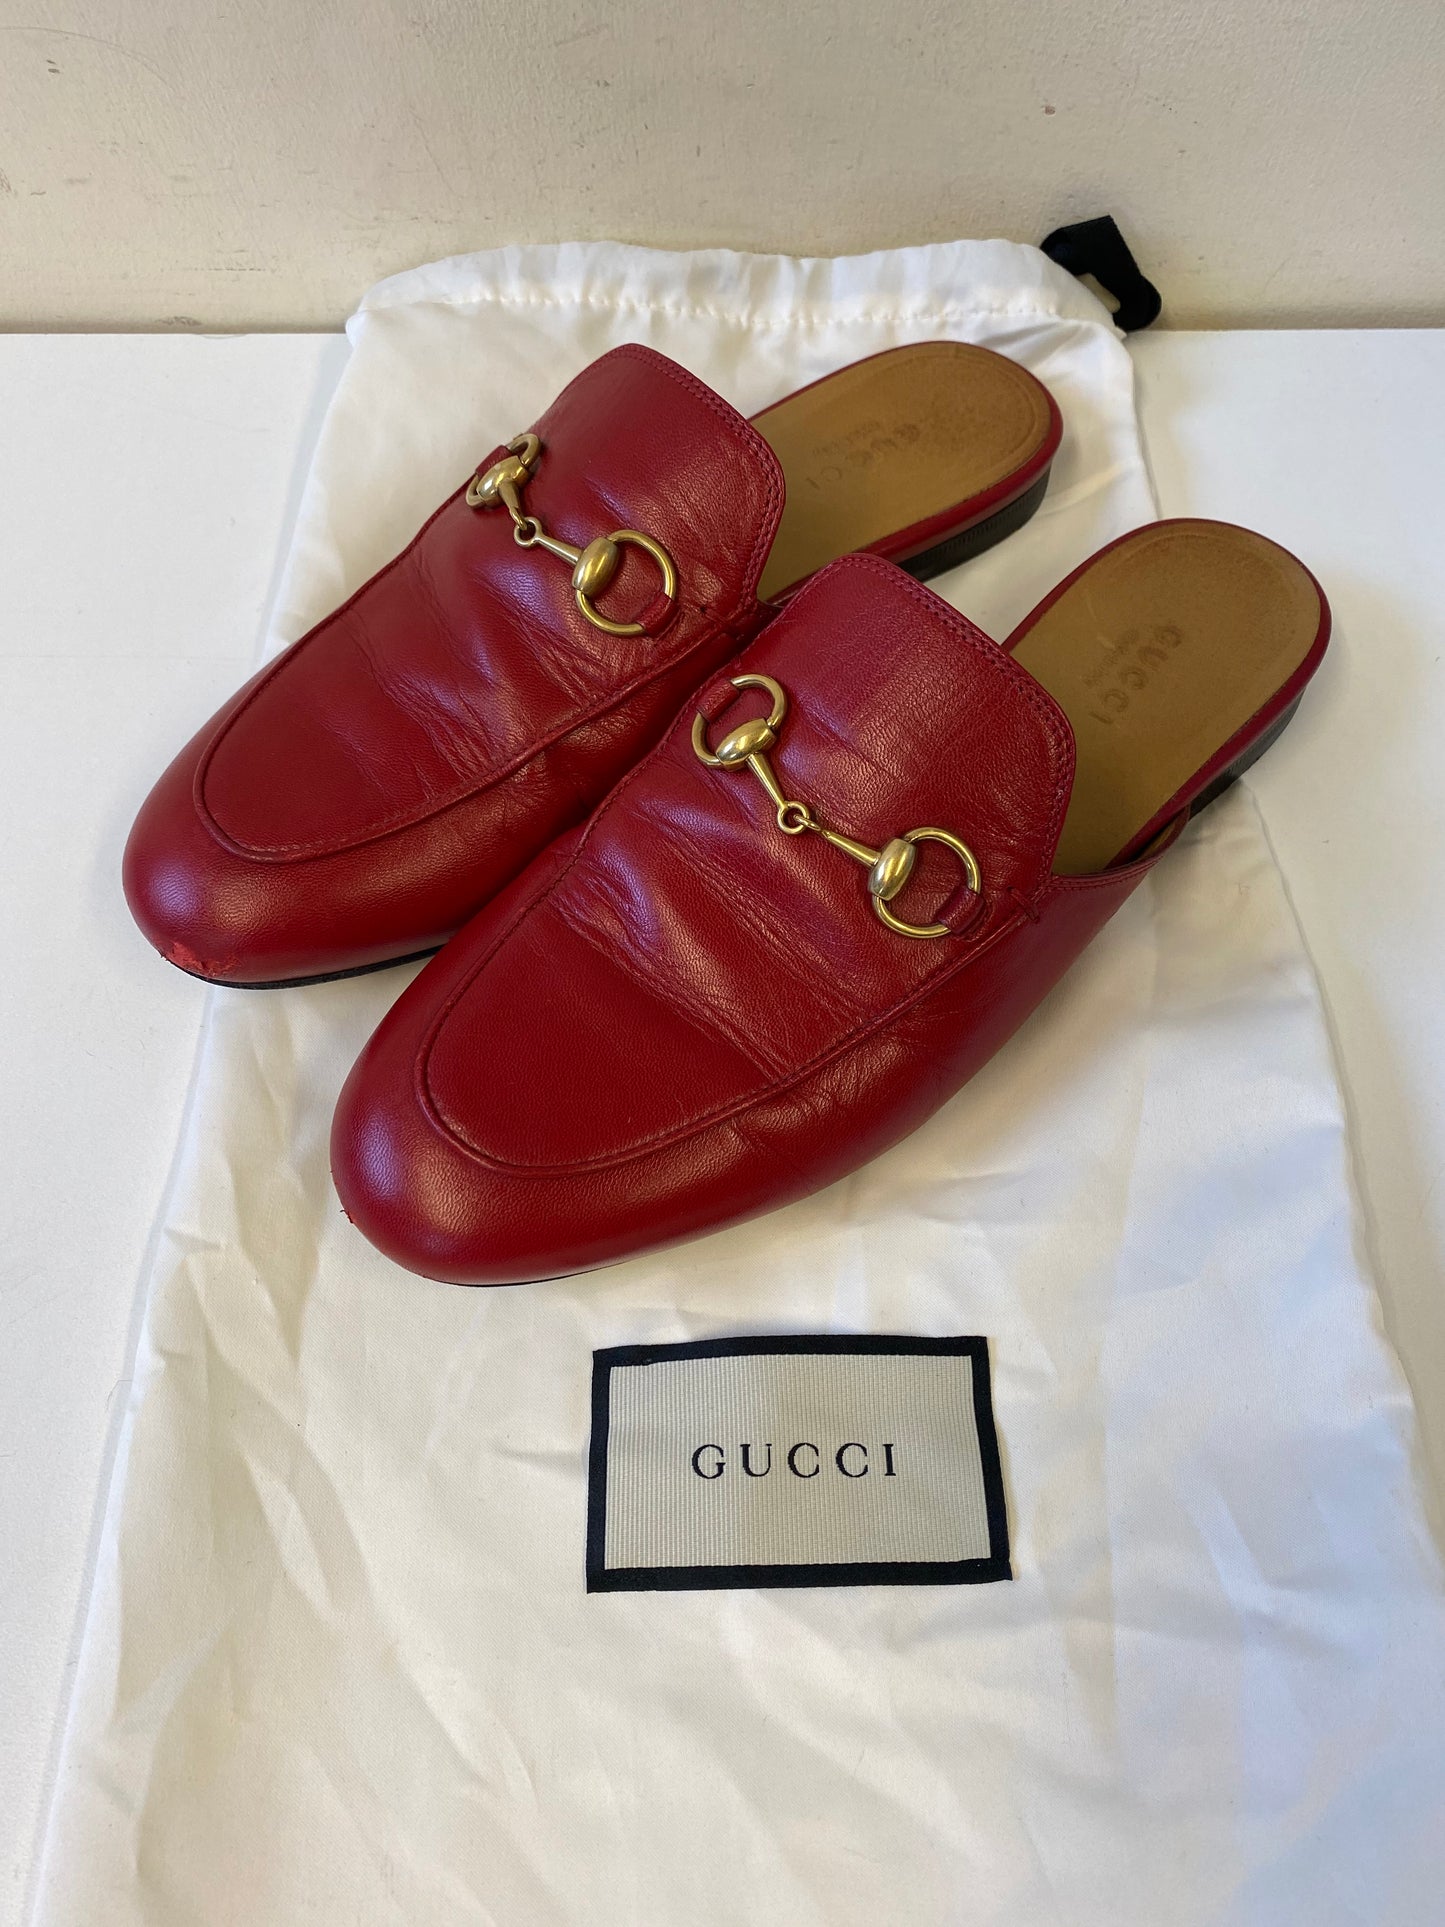 GUCCI RED LEATHER PRINCETOWN SLIPPERS / SHOES SIZE 36 UK 3